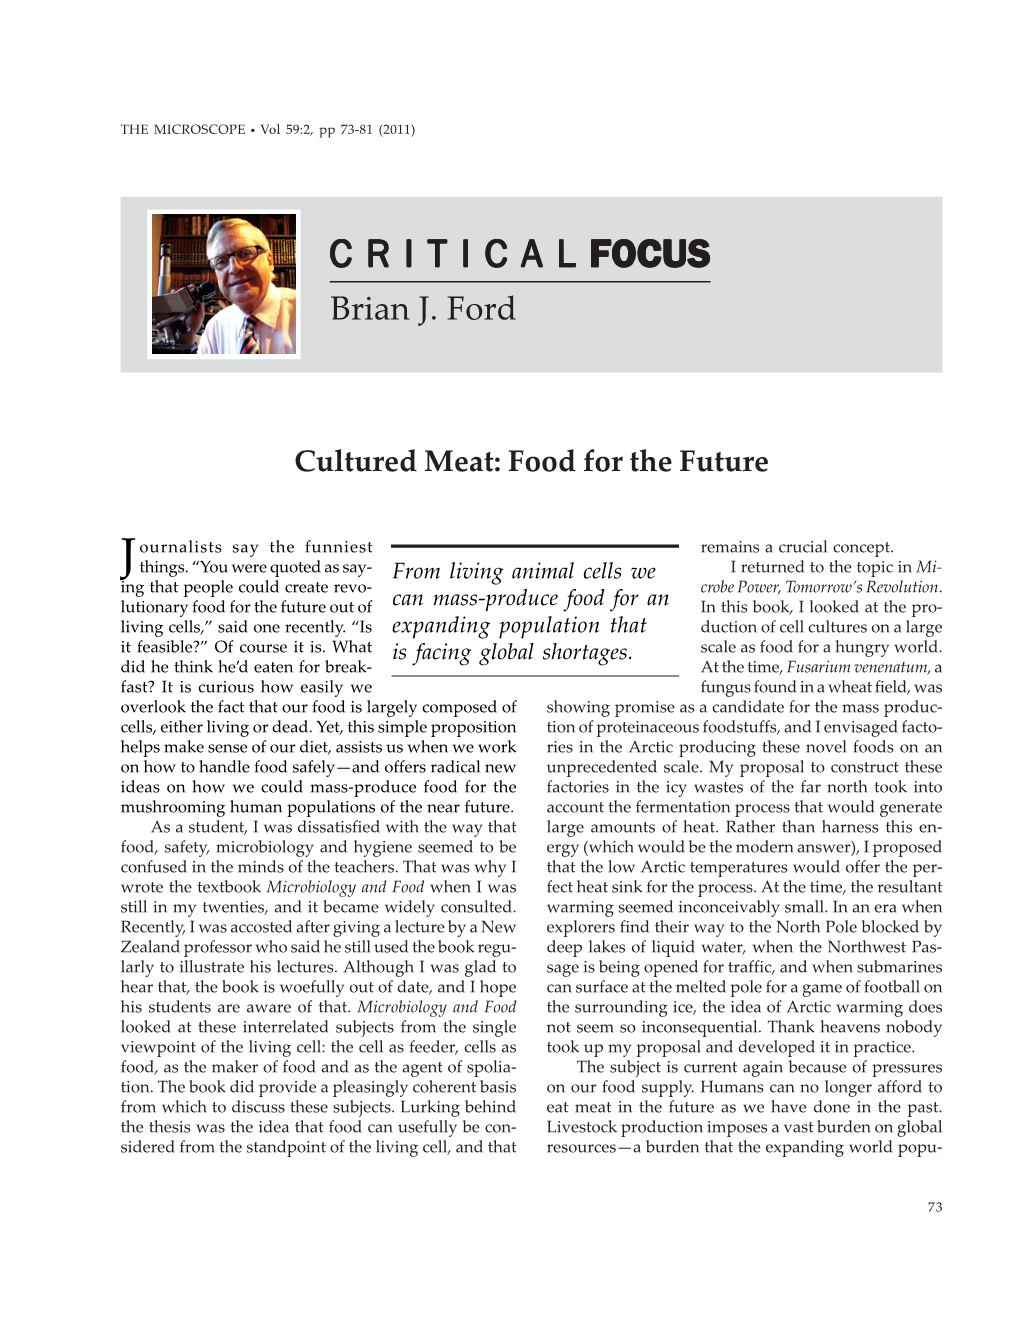 Cultured Meat: Food for the Future